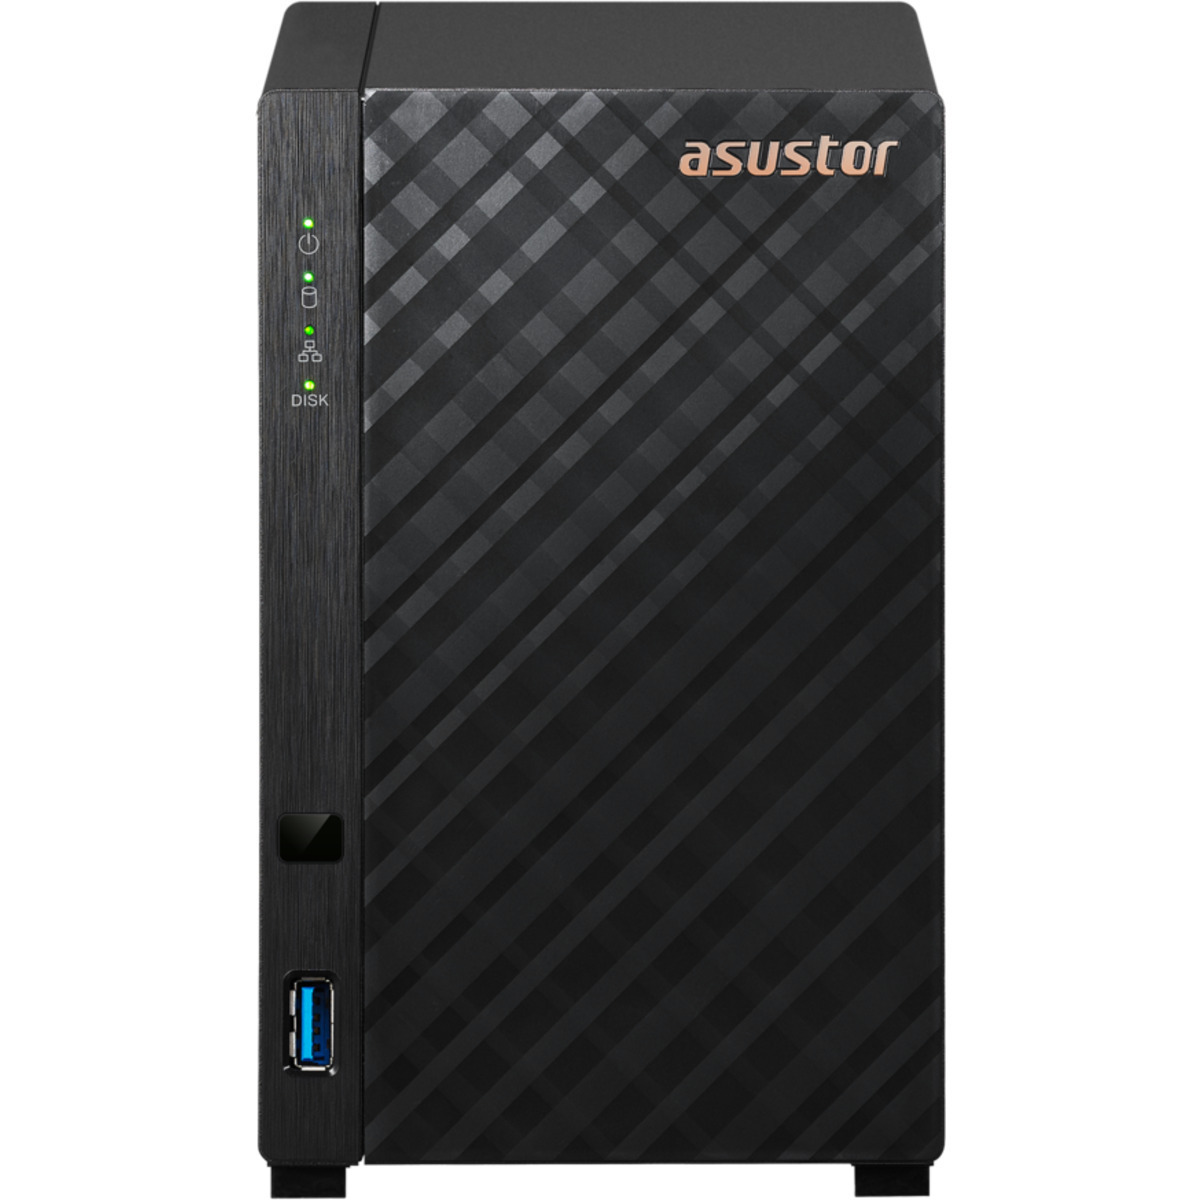 ASUSTOR DRIVESTOR 2 Lite AS1102TL 8tb 2-Bay Desktop Personal / Basic Home / Small Office NAS - Network Attached Storage Device 2x4tb Western Digital Ultrastar DC HC310 HUS726T4TALE6L4 3.5 7200rpm SATA 6Gb/s HDD ENTERPRISE Class Drives Installed - Burn-In Tested DRIVESTOR 2 Lite AS1102TL